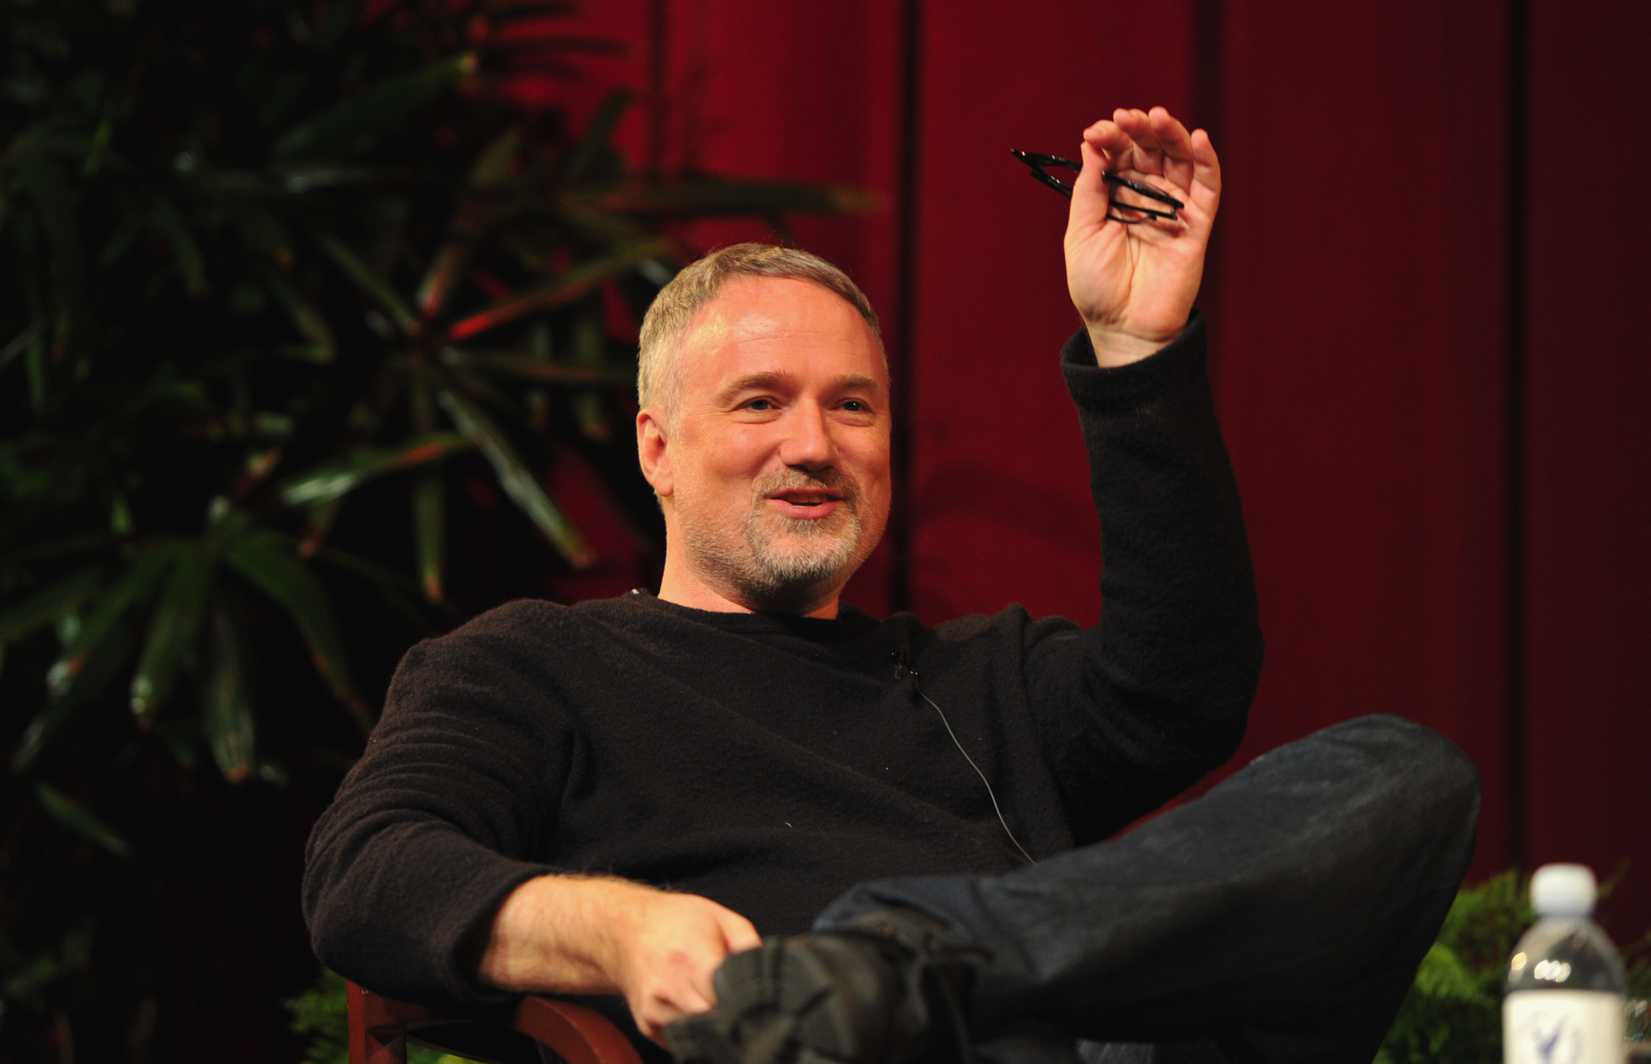 Director David Fincher speaks onstage at the 63rd Annual Directors Guild Of America Awards Feature Film Symposium held at the DGA on January 28, 2012 in Hollywood, California. (Alberto E. Rodriguez—DGA/Getty)